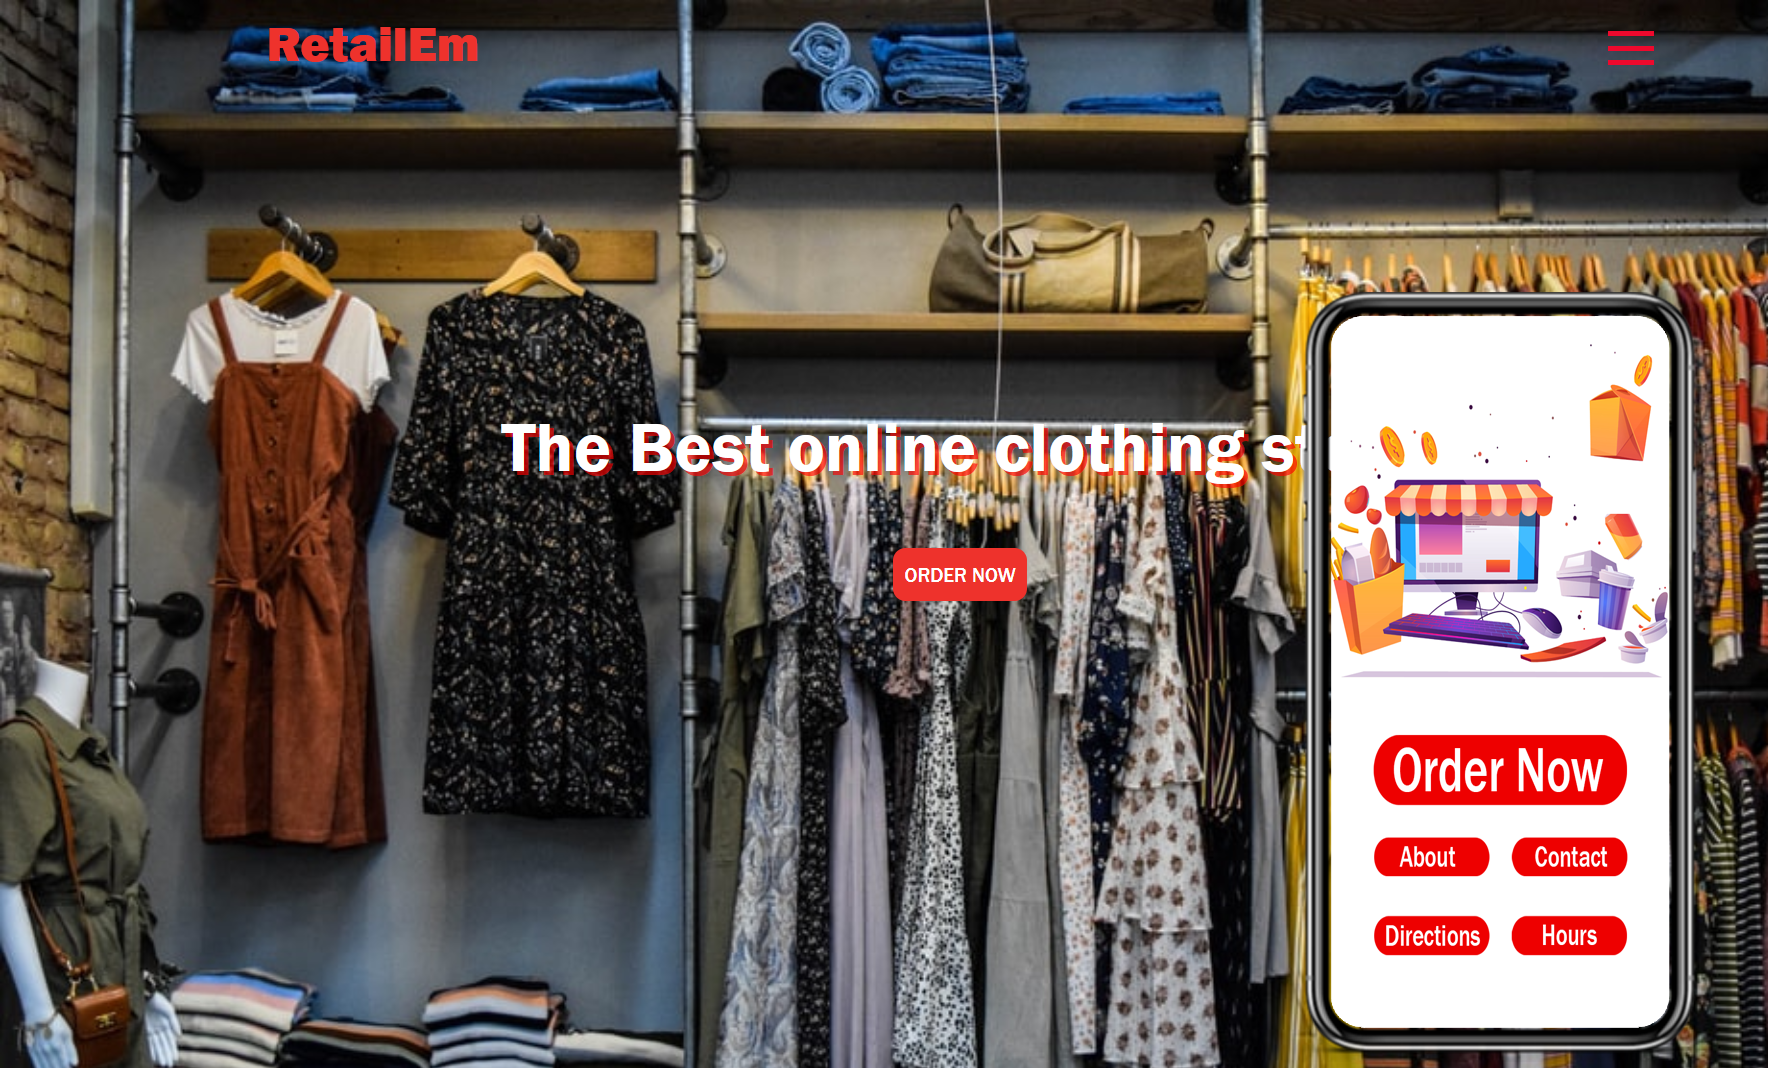 Launch your online ordering retail store